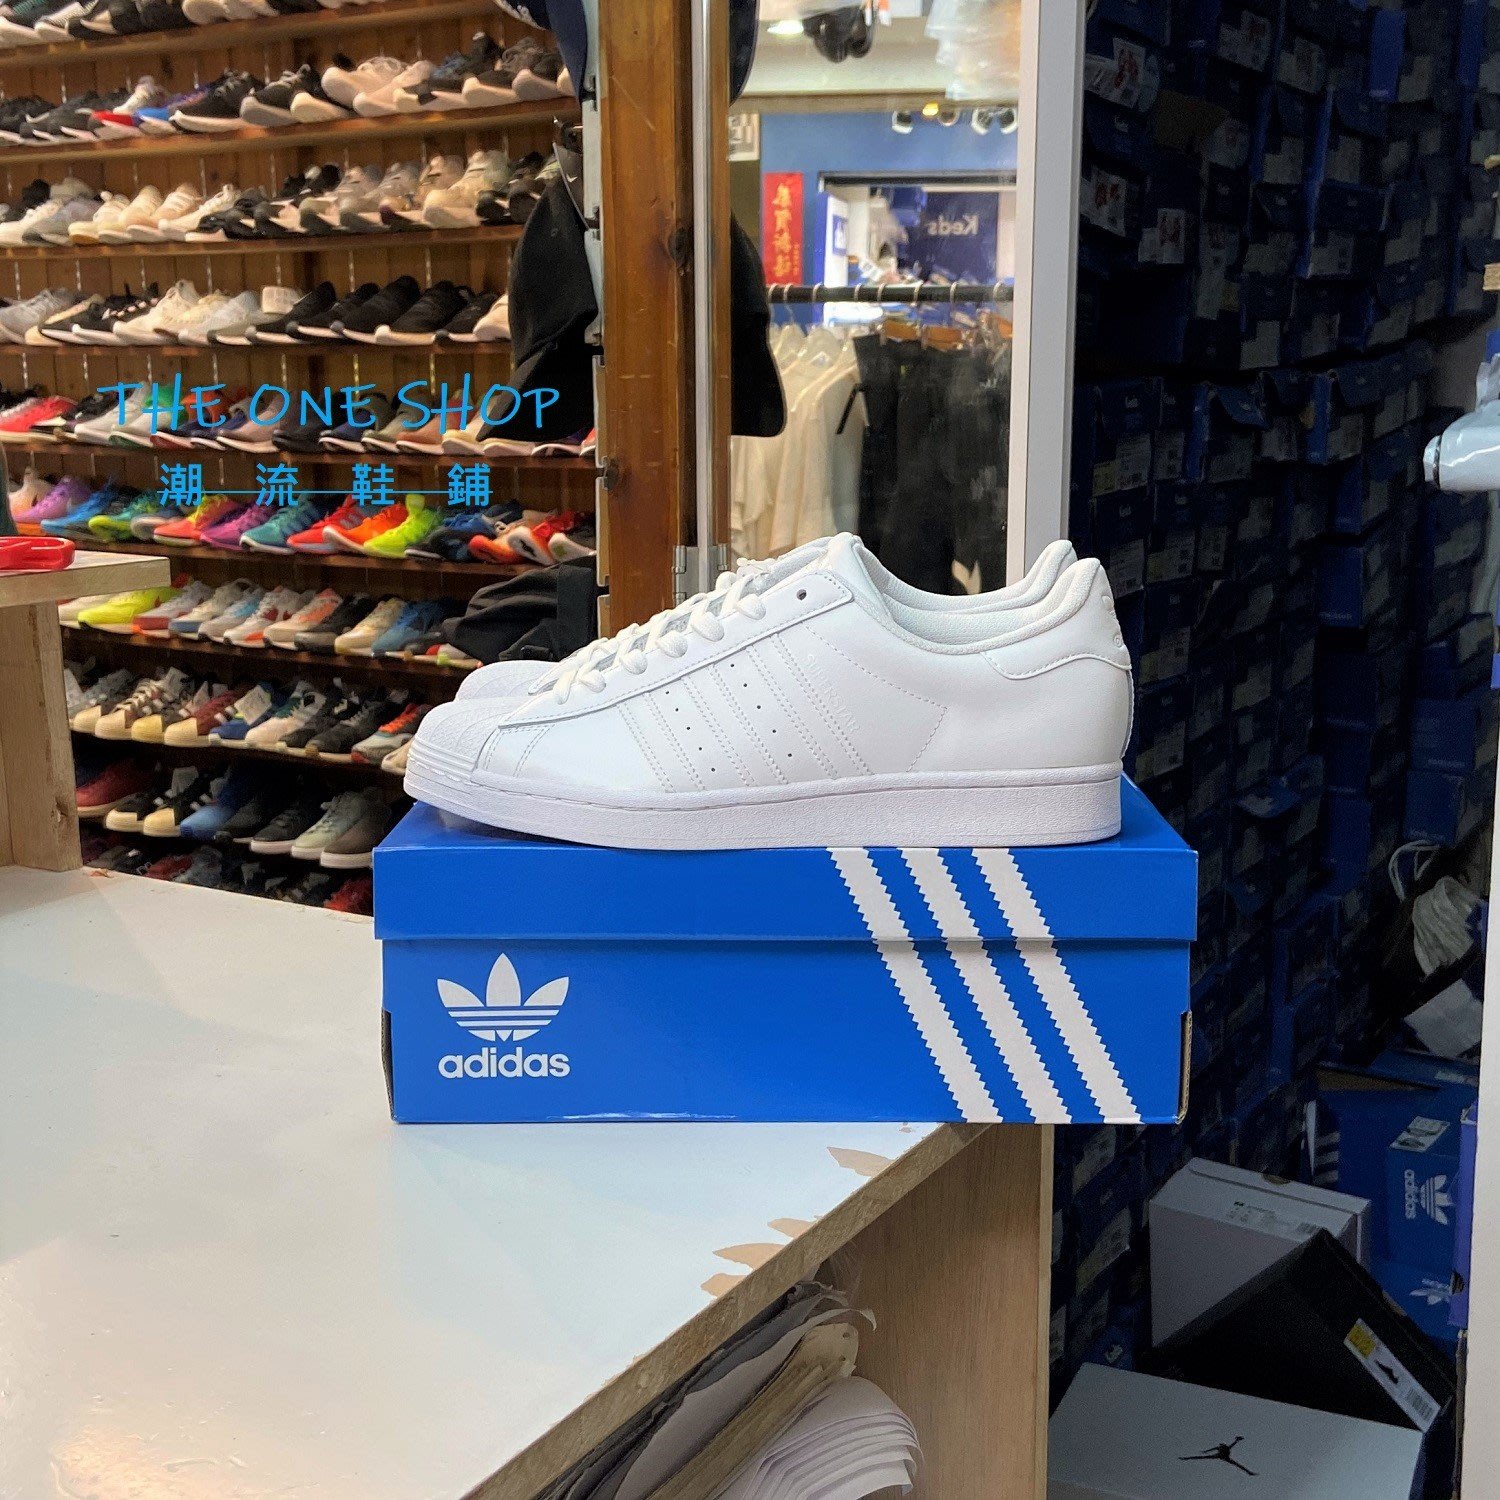 Adidas Superstar Eg4960limited Special Sales And Special Offers Women S Men S Sneakers Sports Shoes Shop Athletic Shoes Online Off 51 Free Shipping Fast Shippment